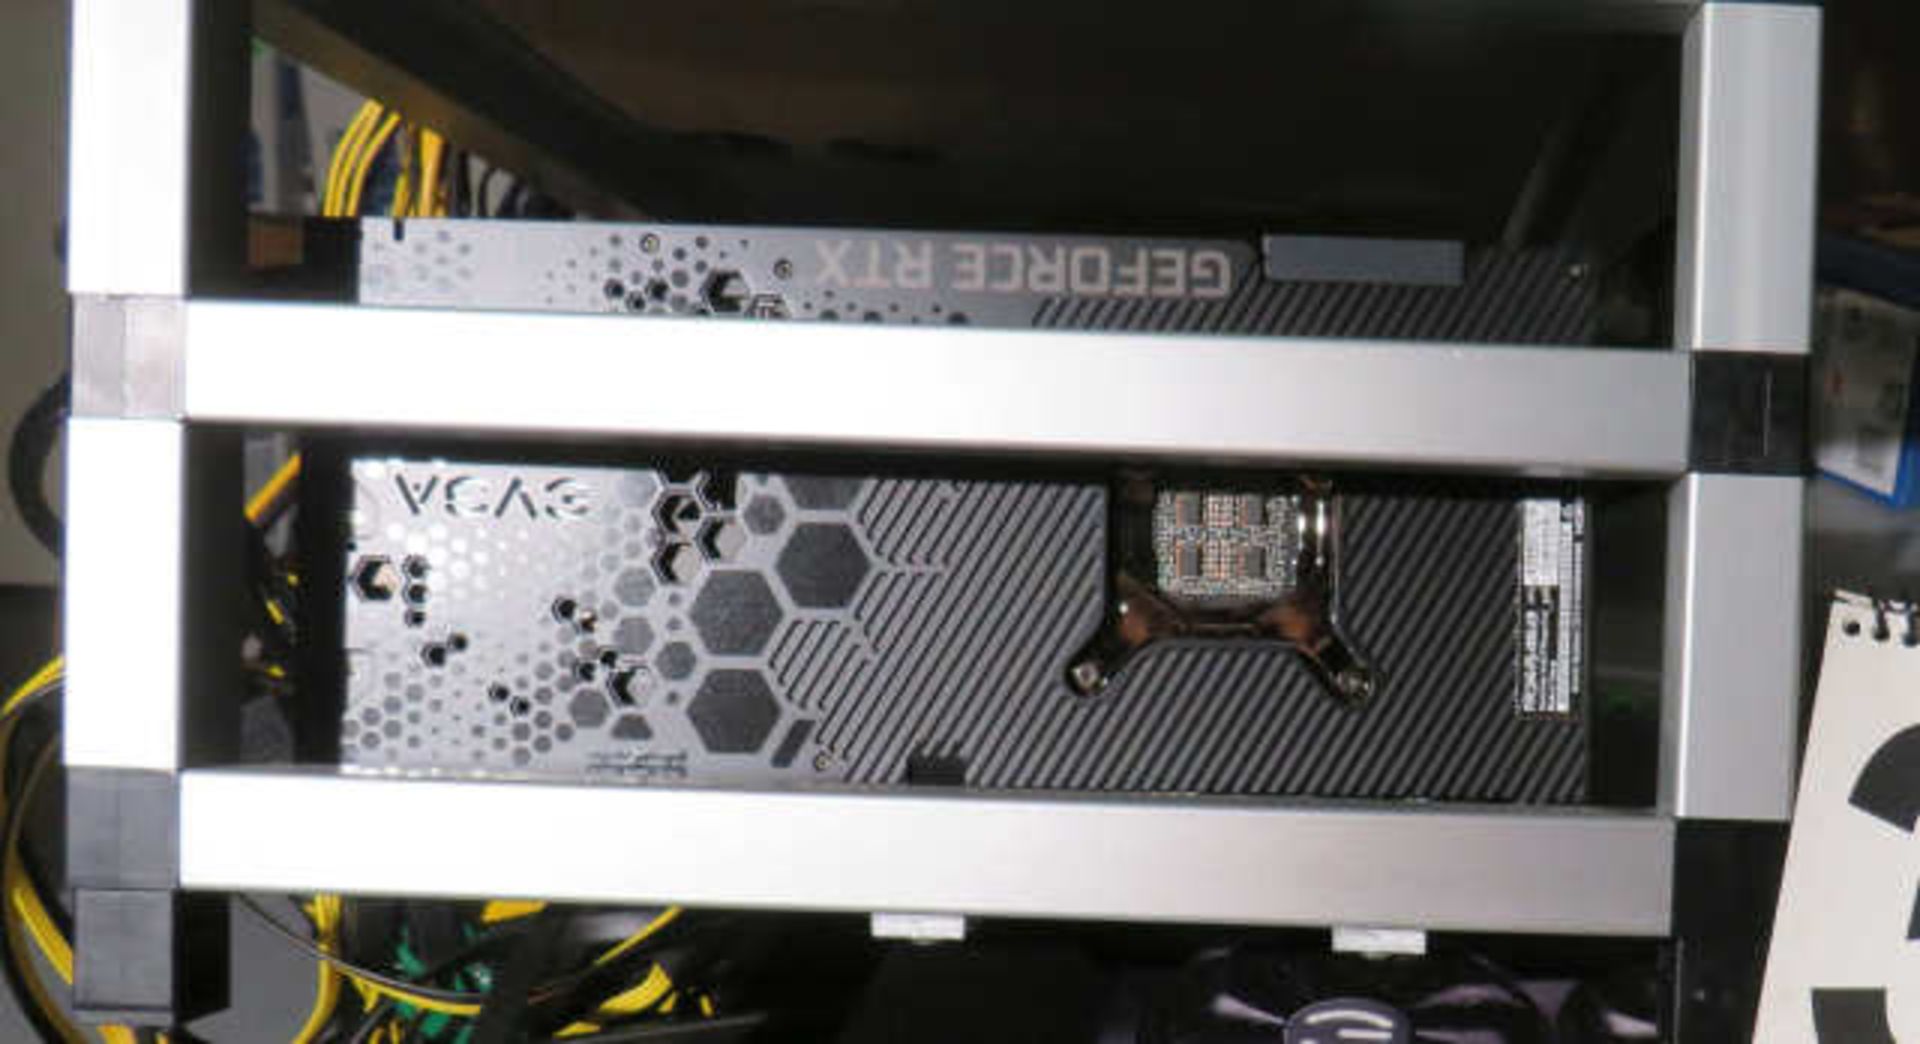 crypto mining rig with 6 Geeforce rtx 3090 graphics cards comes - Image 6 of 10